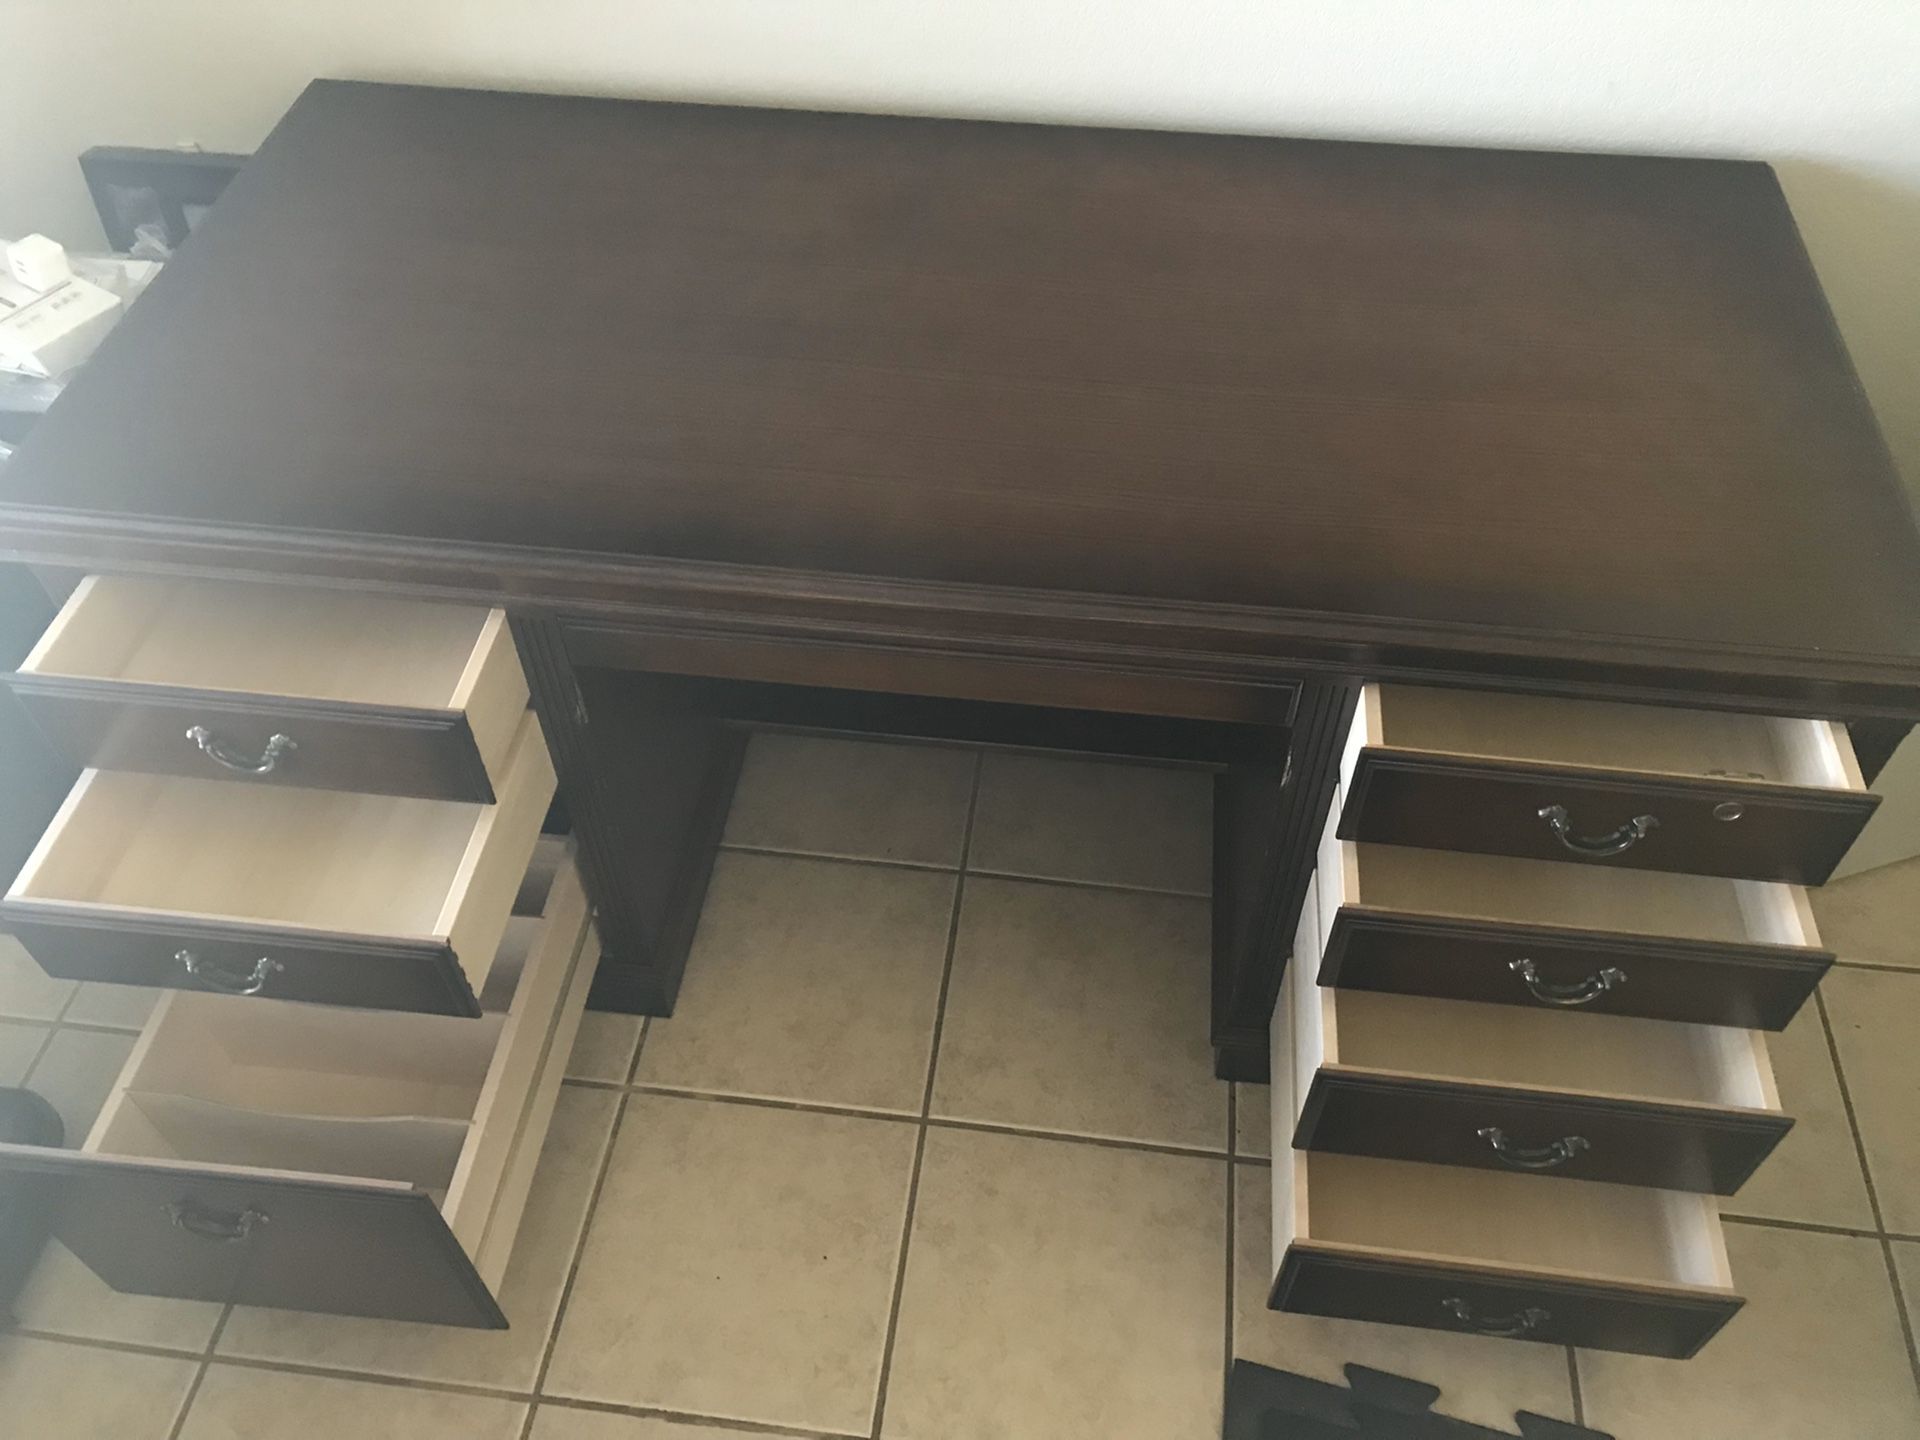 Executive Office Desk! Great Quality! Very Sturdy